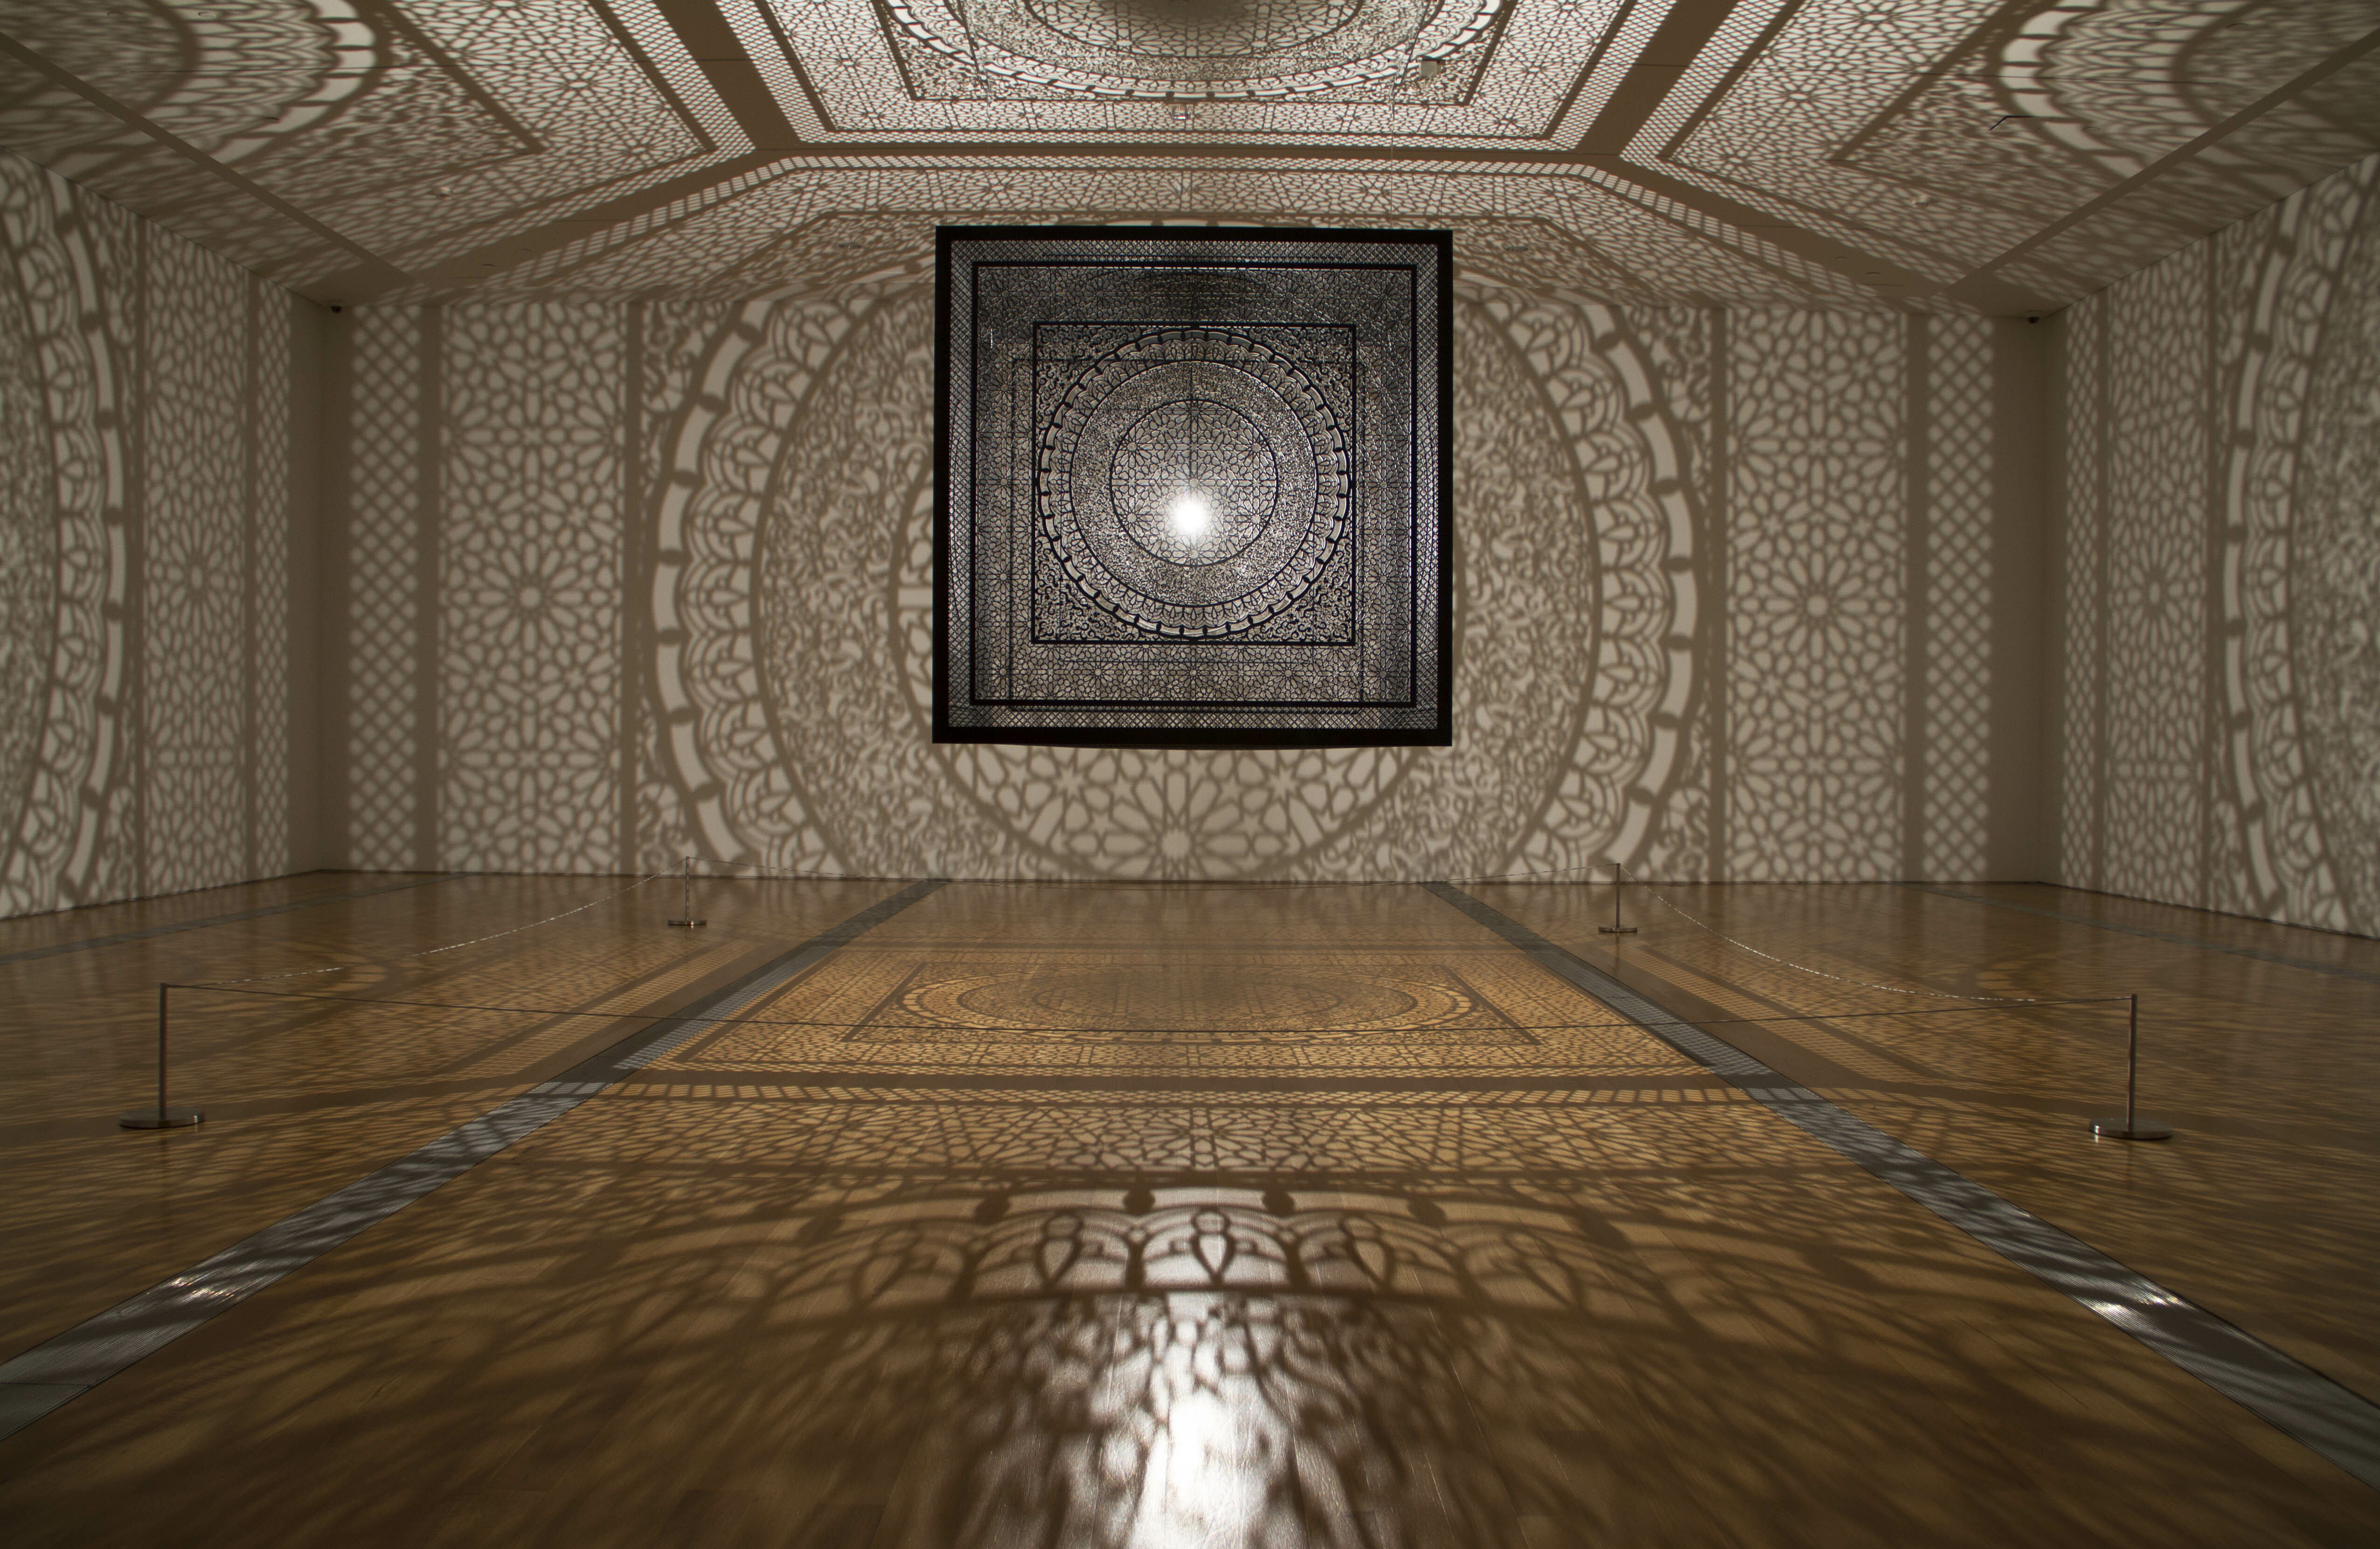 Anila Quayyum Agha, "Intersections," 2013, Lacquered steel and halogen bulb, 78" x 78" x 78"